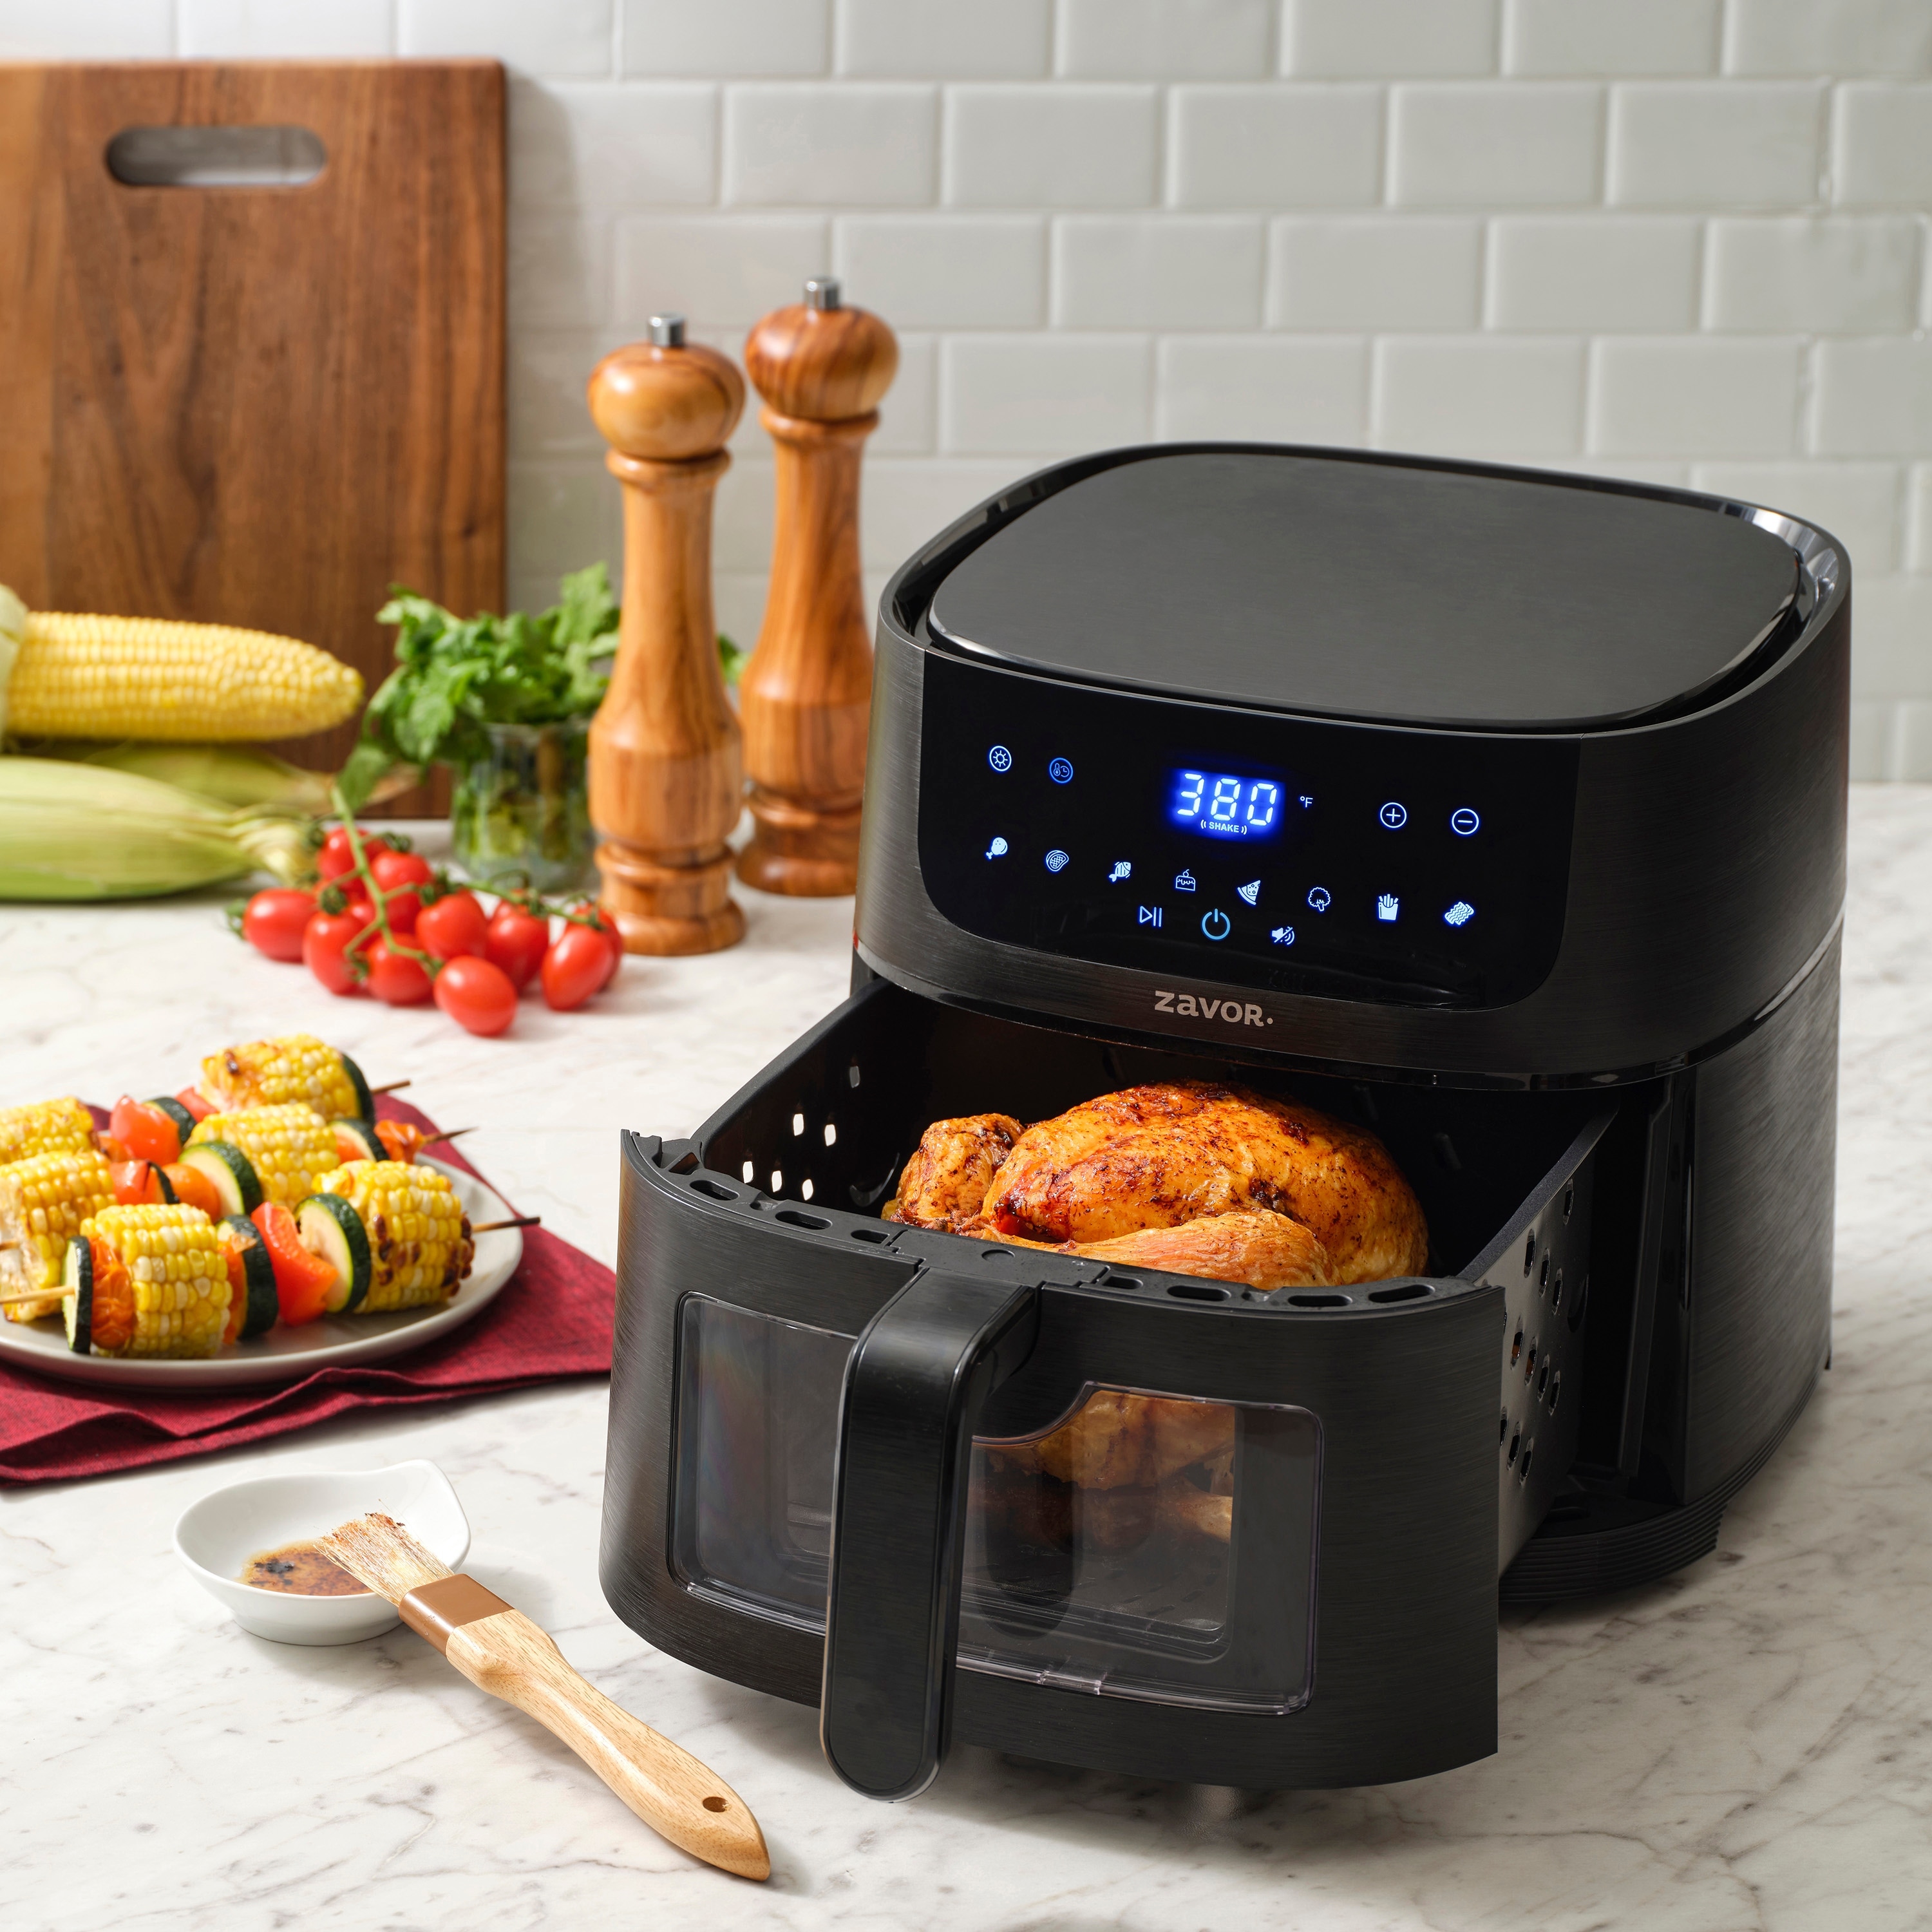 https://ak1.ostkcdn.com/images/products/is/images/direct/9b42a53add09169dab8e08a86785d4d8b2a54827/Sizzle-6.3-qt-Digital-Air-Fryer-with-Clear-Window-and-Shake-Alert.jpg